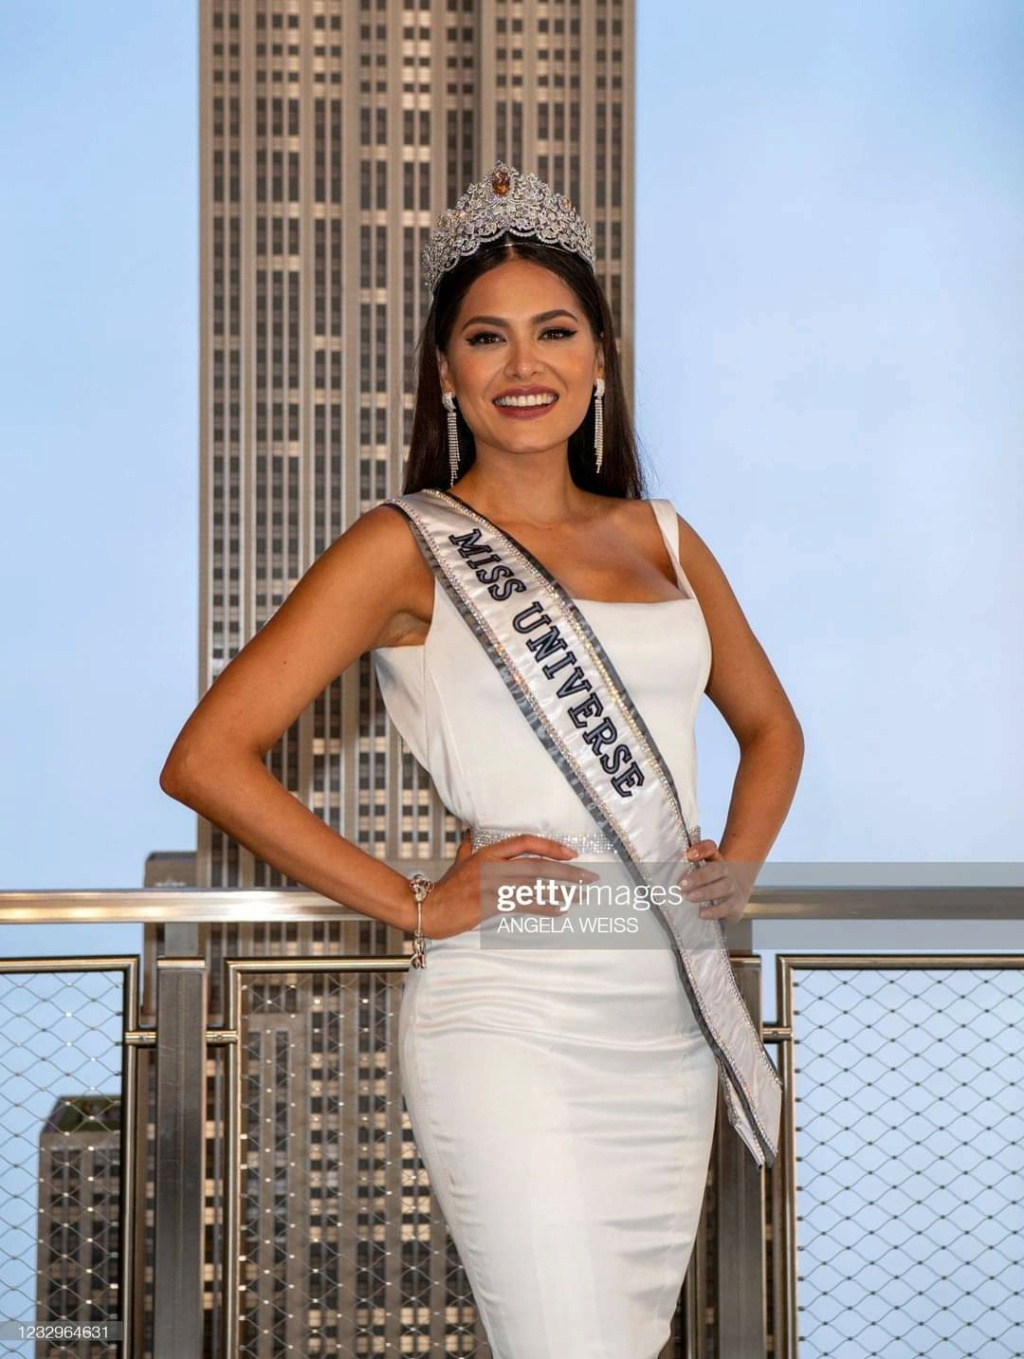 The Official Thread Of Miss Universe 2020 - Andrea Meza of Mexico  Fb_17554